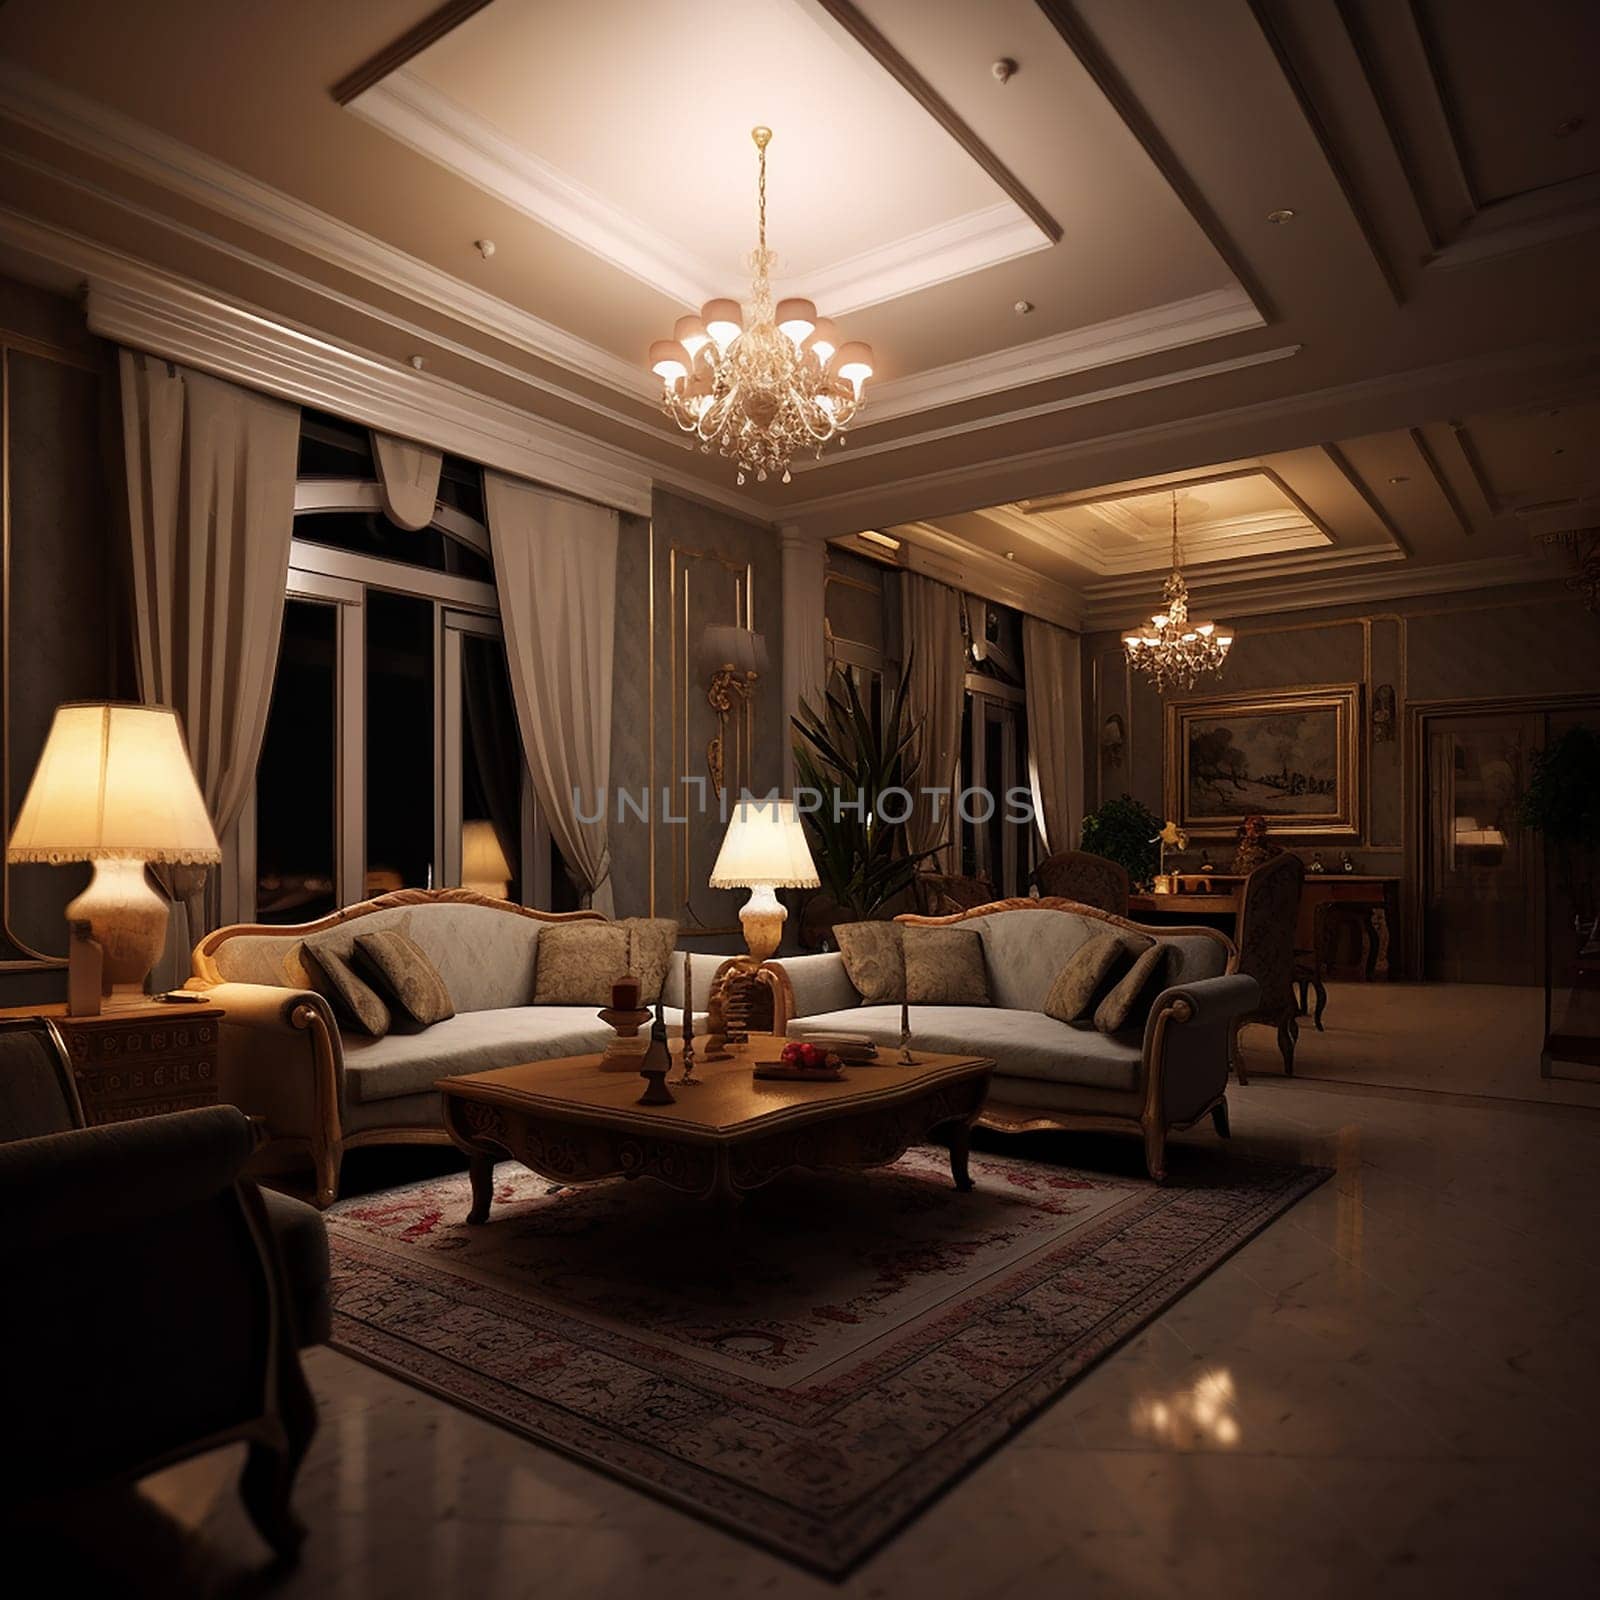 Cozy living room at night with warm lighting, comfortable sofa by Hype2art